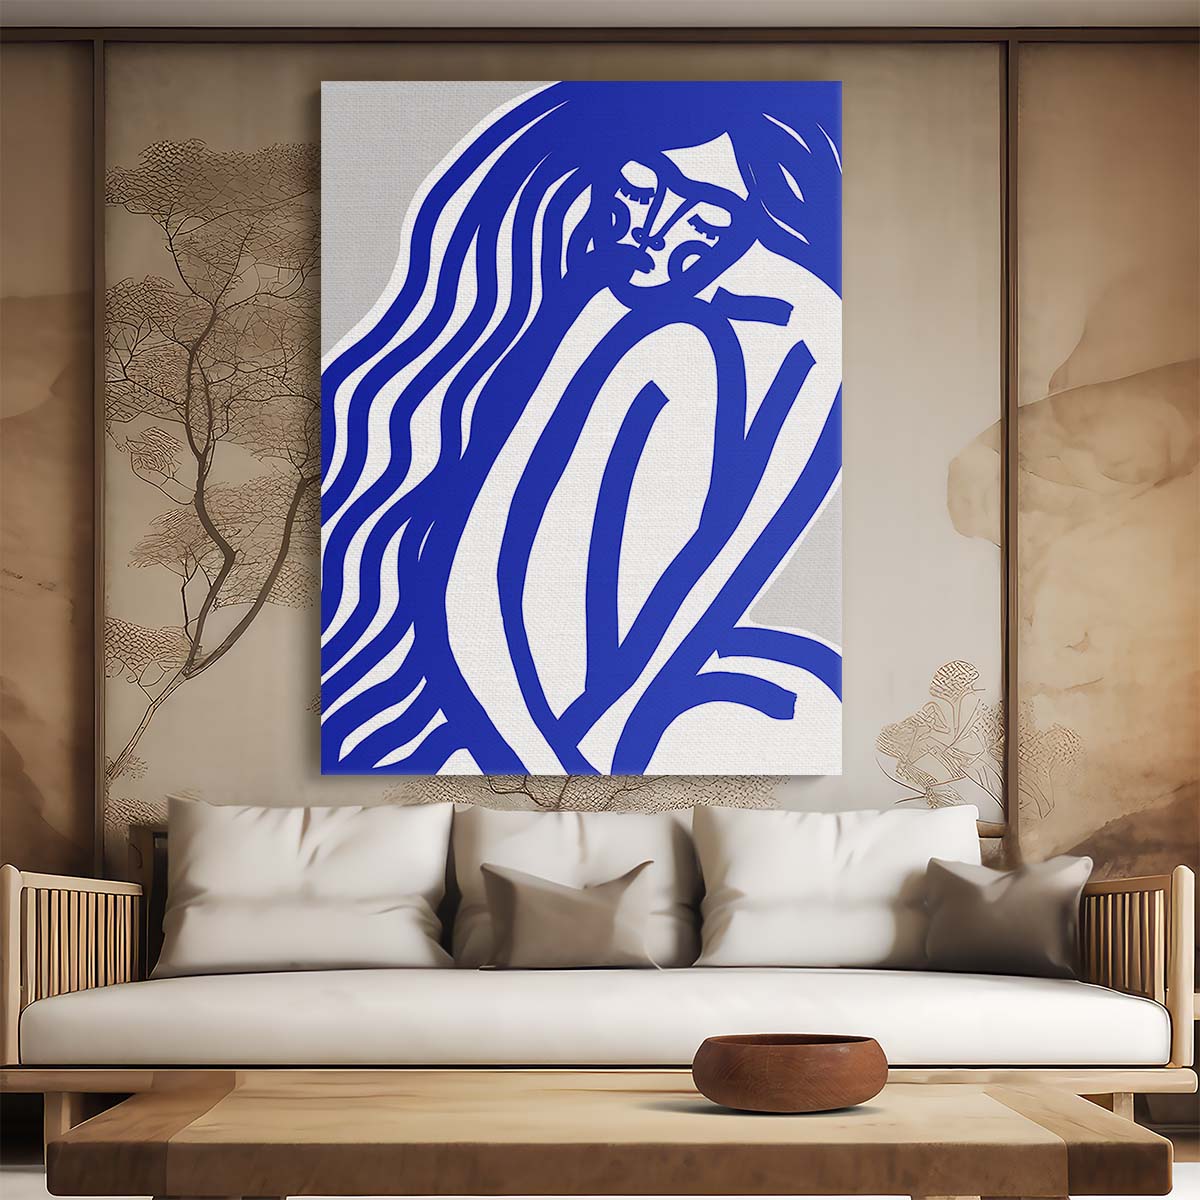 Frida Kahlo Inspired Blue Illustration of Woman by Treechild by Luxuriance Designs, made in USA